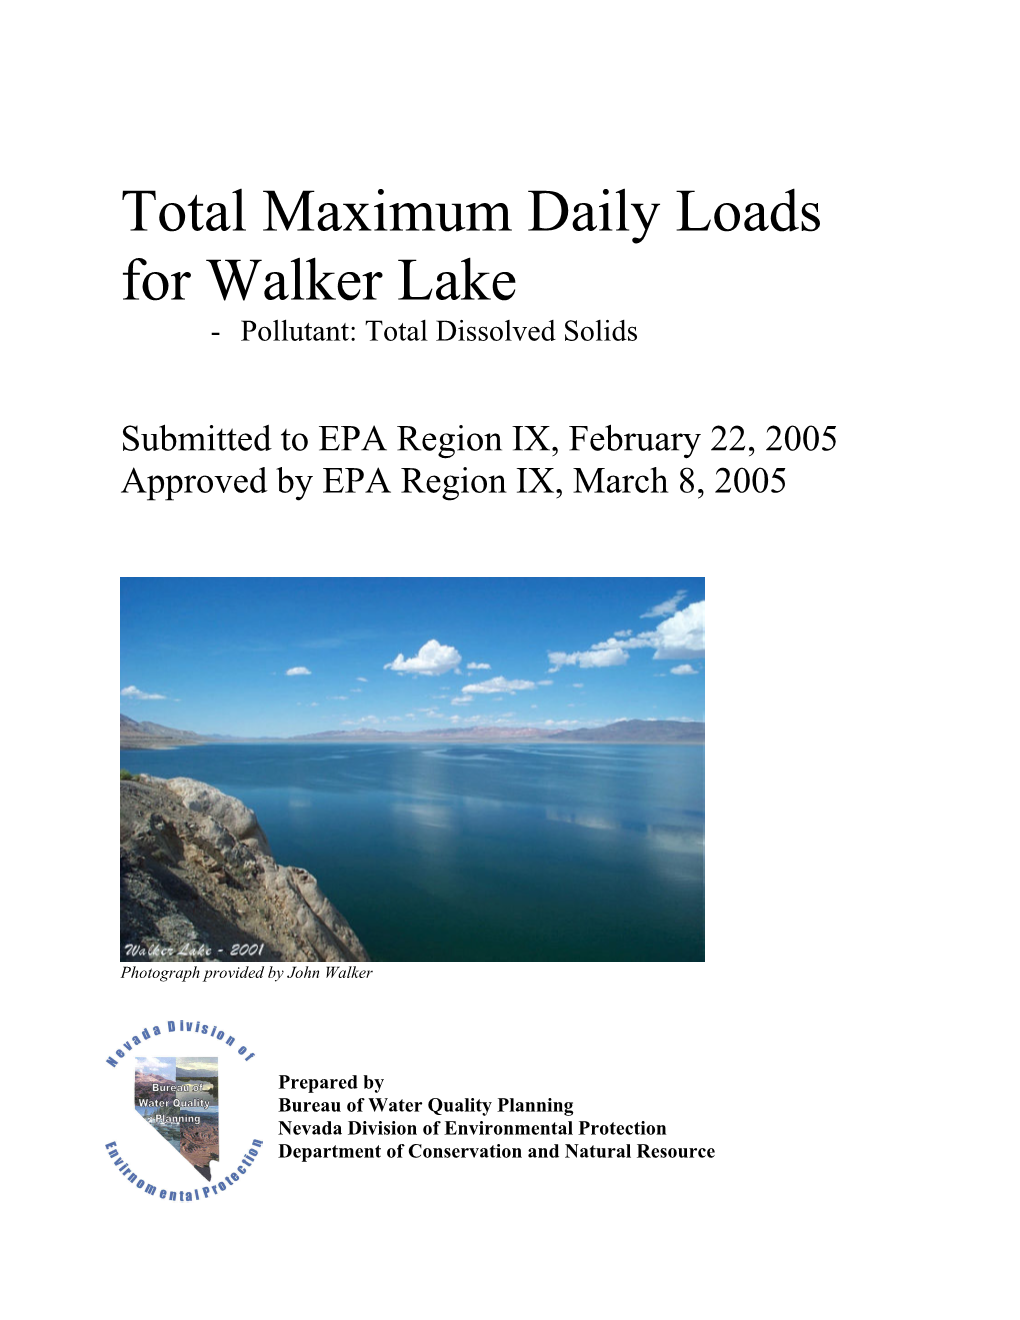 Total Maximum Daily Loads for Walker Lake - Pollutant: Total Dissolved Solids